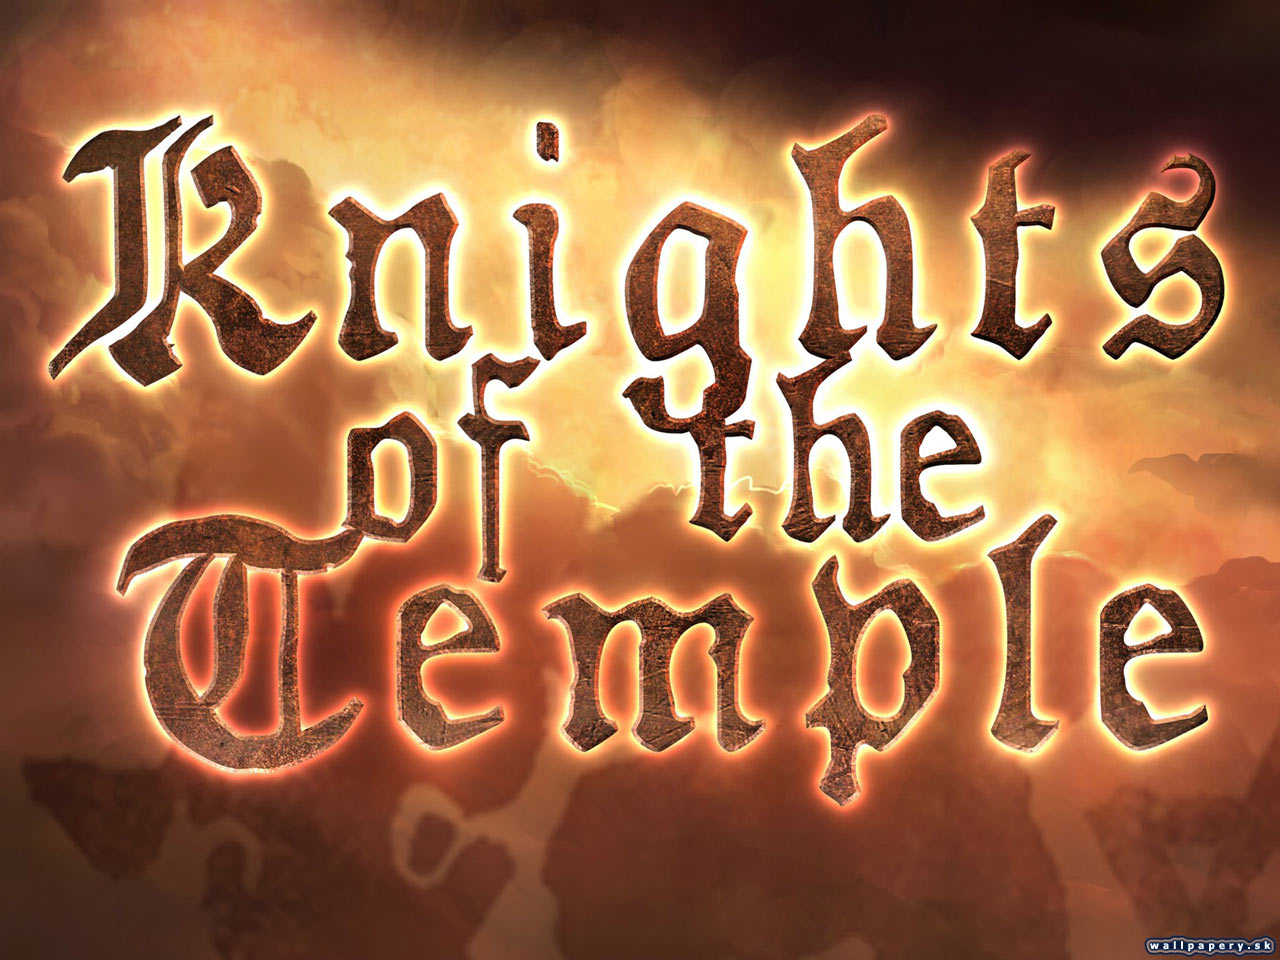 Knights of the Temple: Infernal Crusade - wallpaper 12